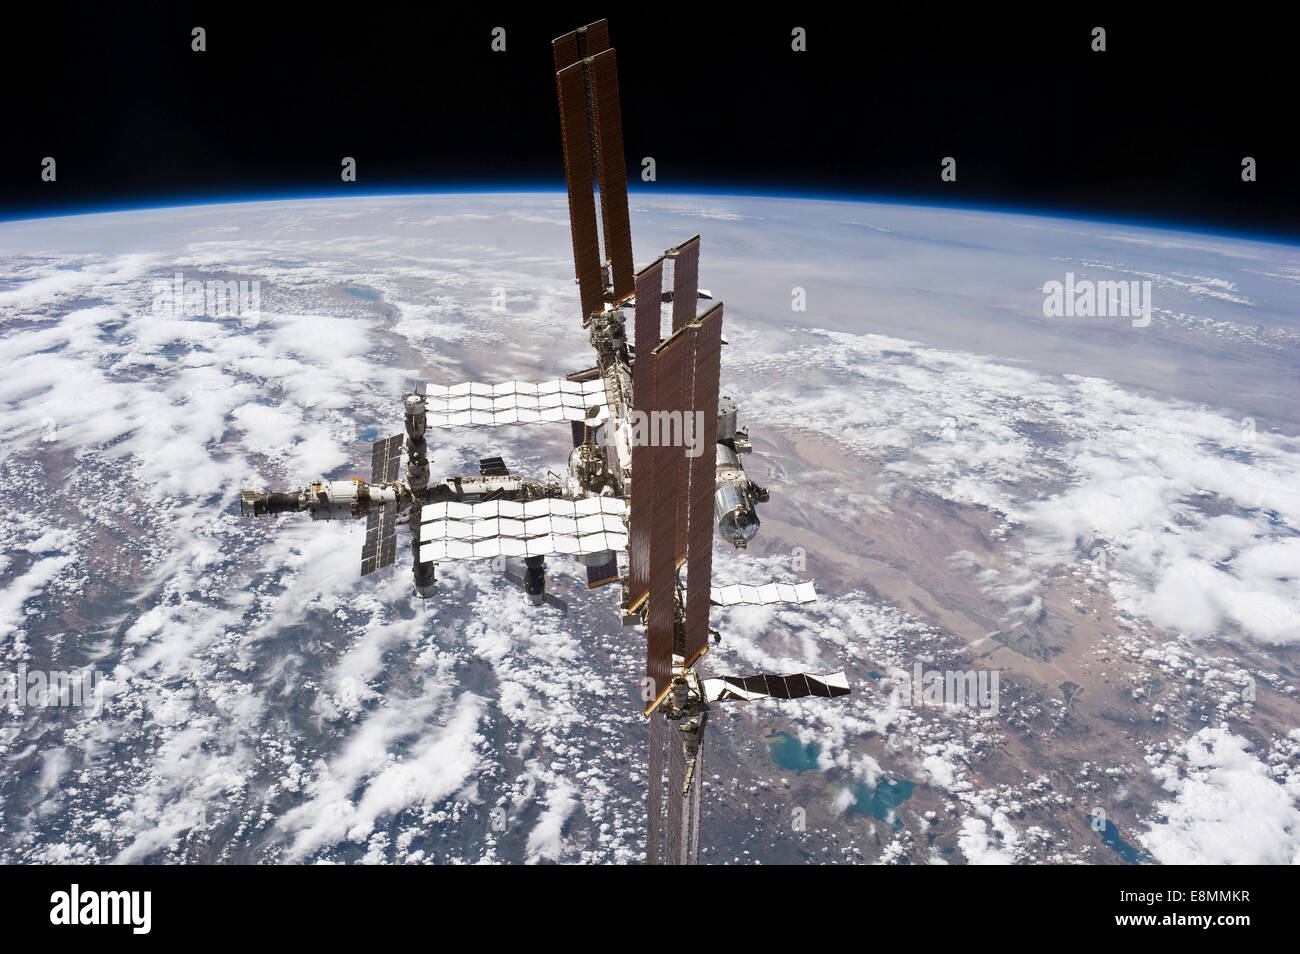 July 19, 2011 - The International Space Station in orbit above Earth. Stock Photo